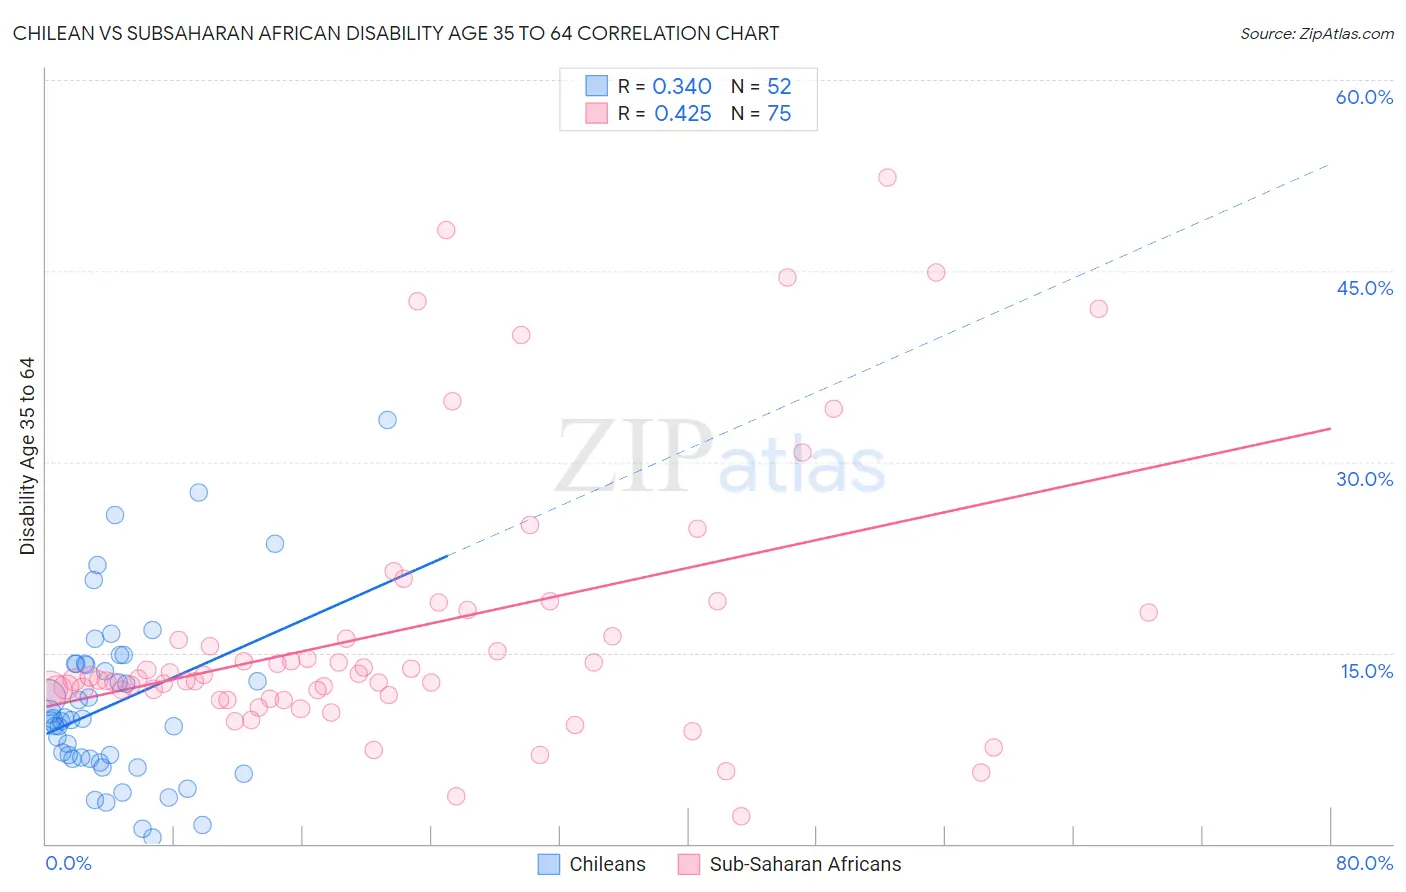 Chilean vs Subsaharan African Disability Age 35 to 64